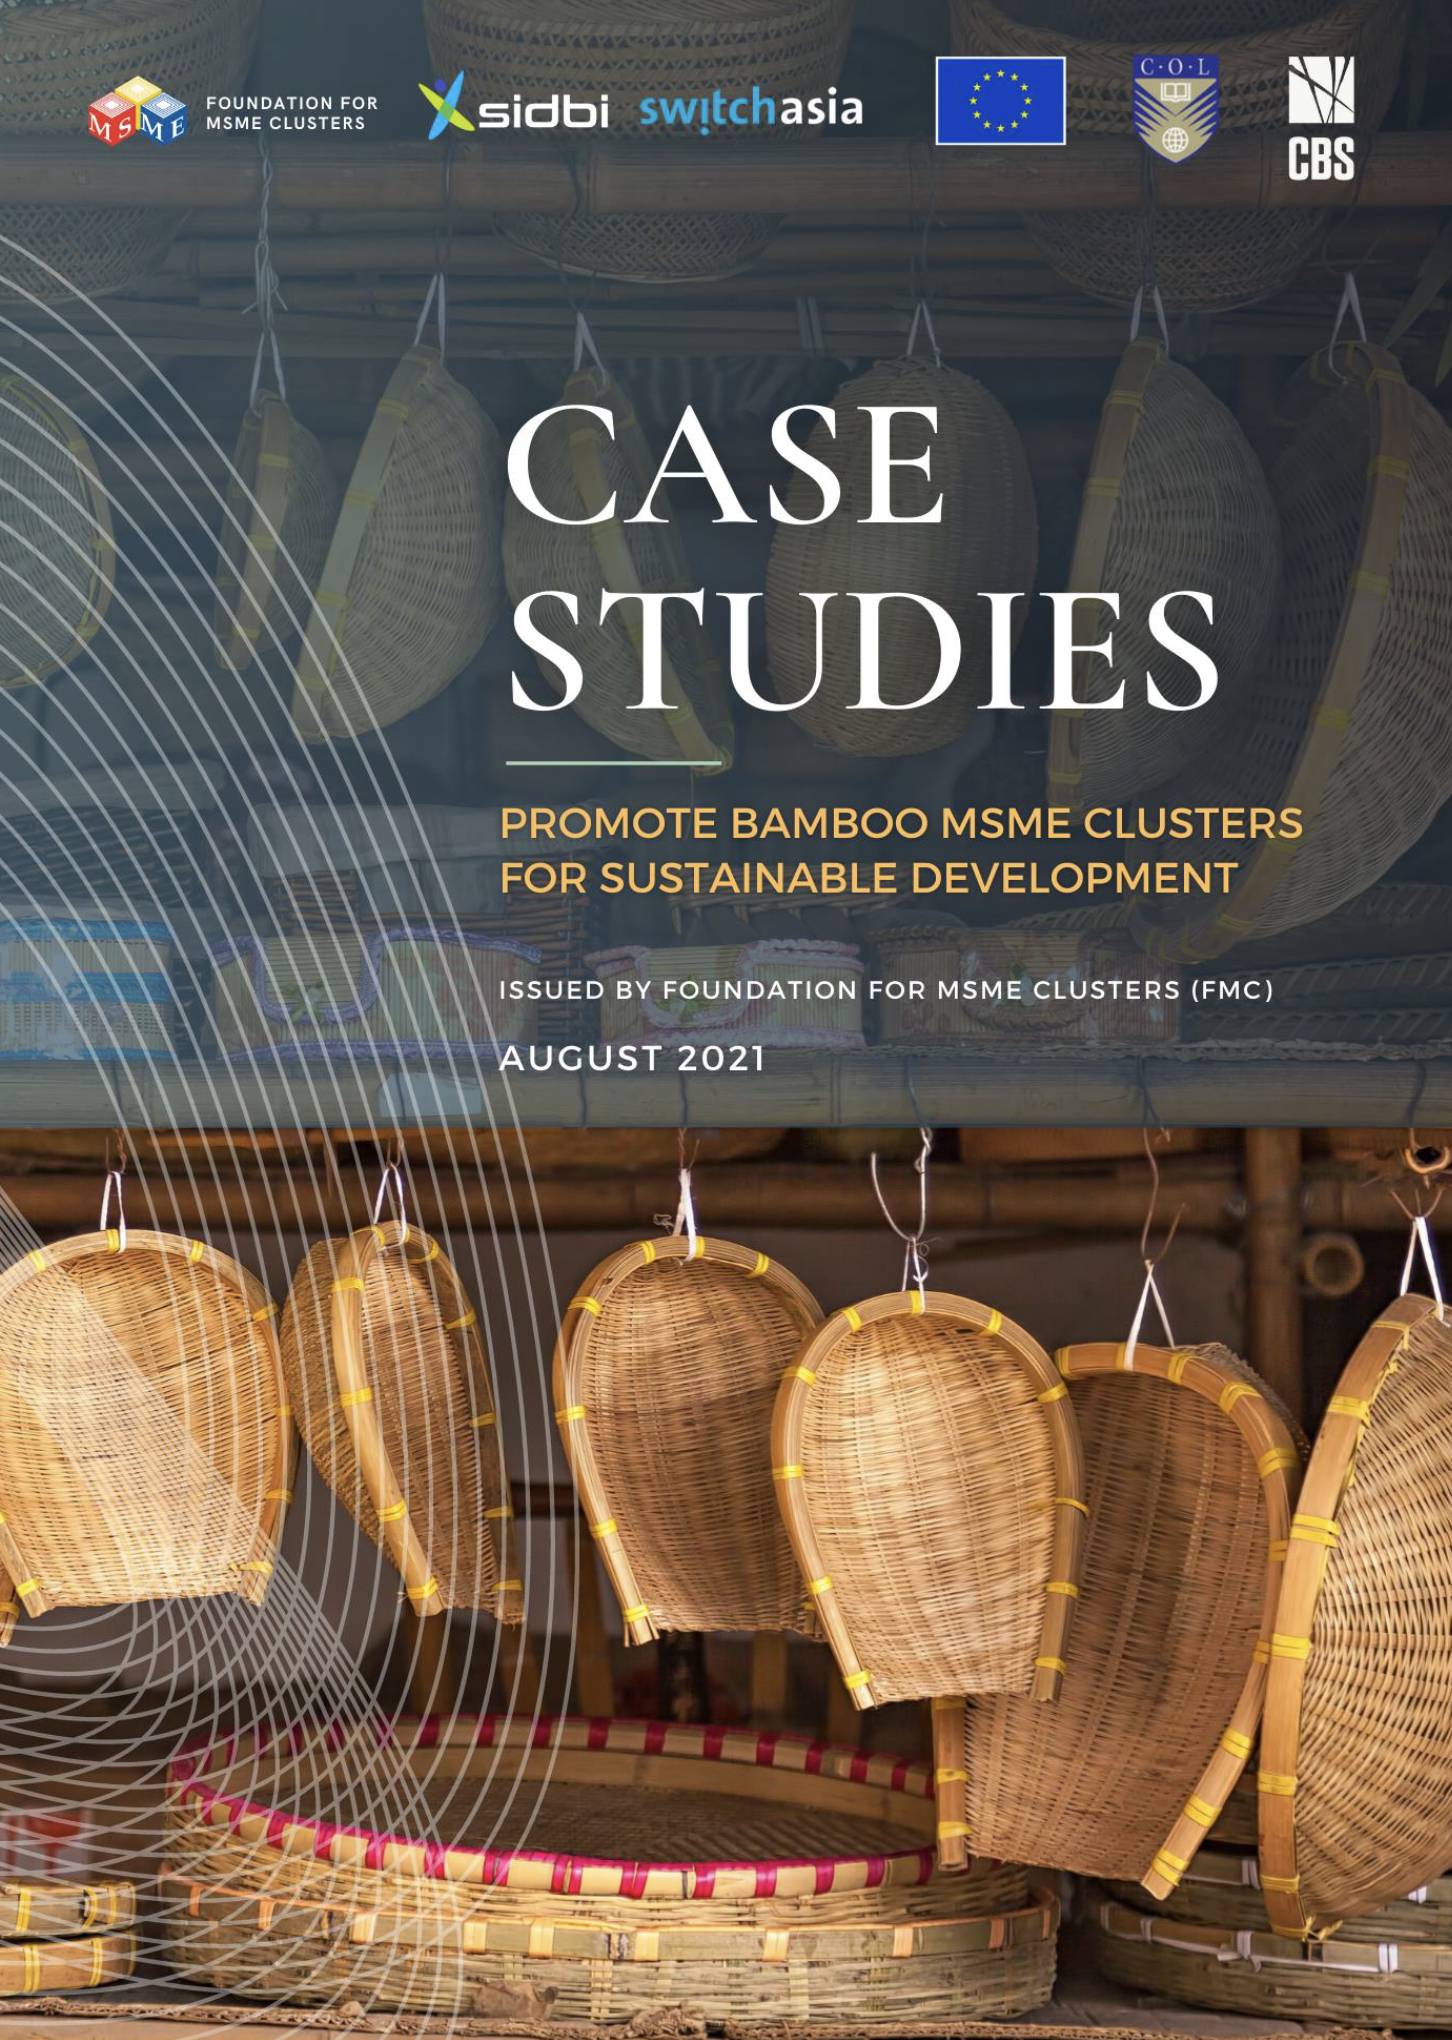 Case studies: Promote Bamboo MSME Clusters for Sustainable Development